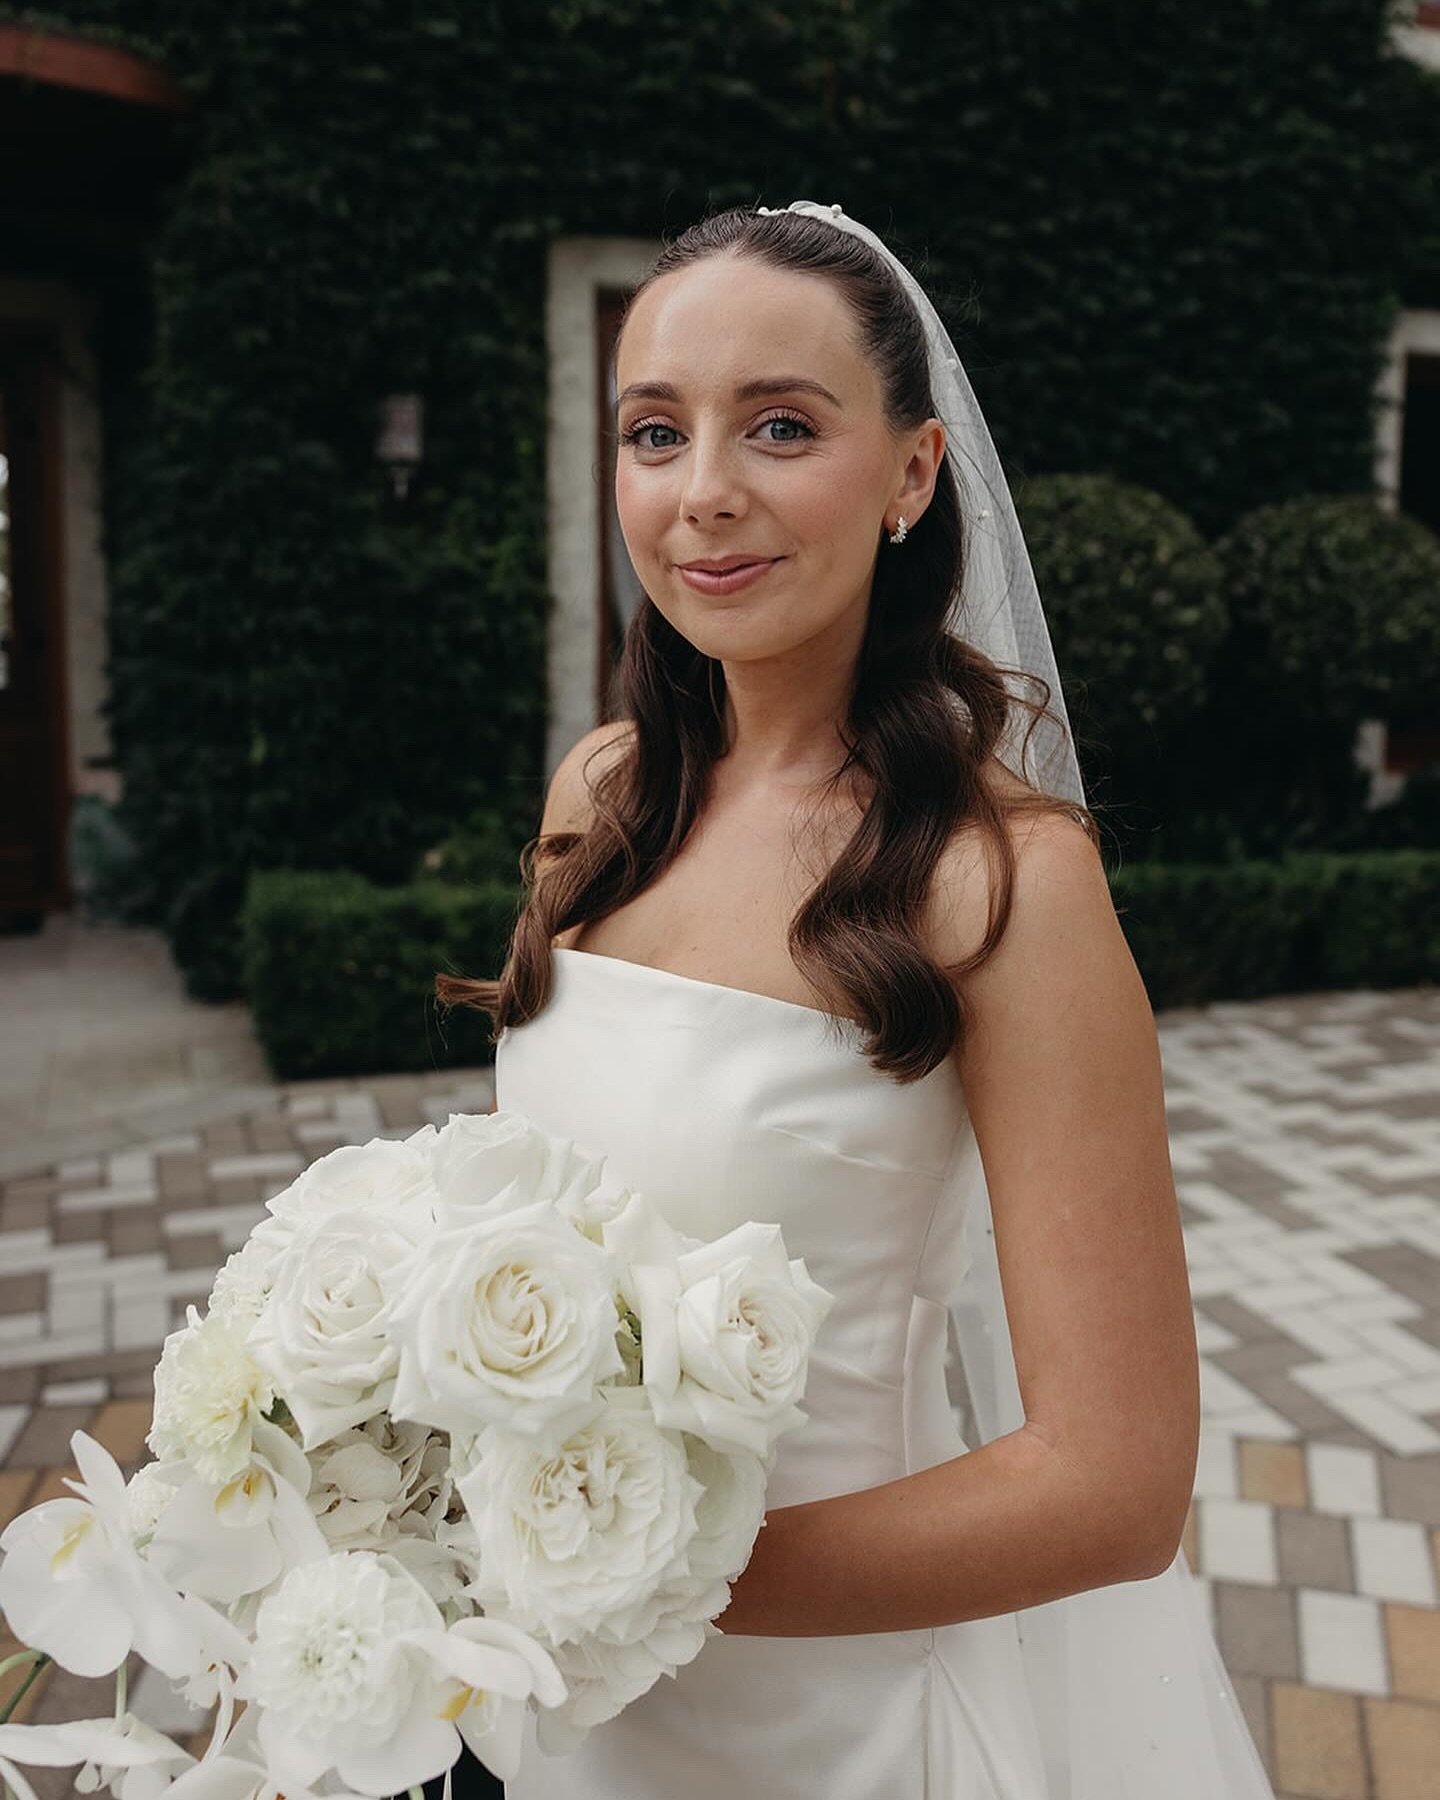 Effortlessly chic bride @ha.nnnnah 😍

Hannah&rsquo;s bridal trial was actually the day she was a bridesmaid! She loved the makeup so much that we decided to build on that for her wedding day. 

@armanibeauty luminous silk was a last minute switch fo